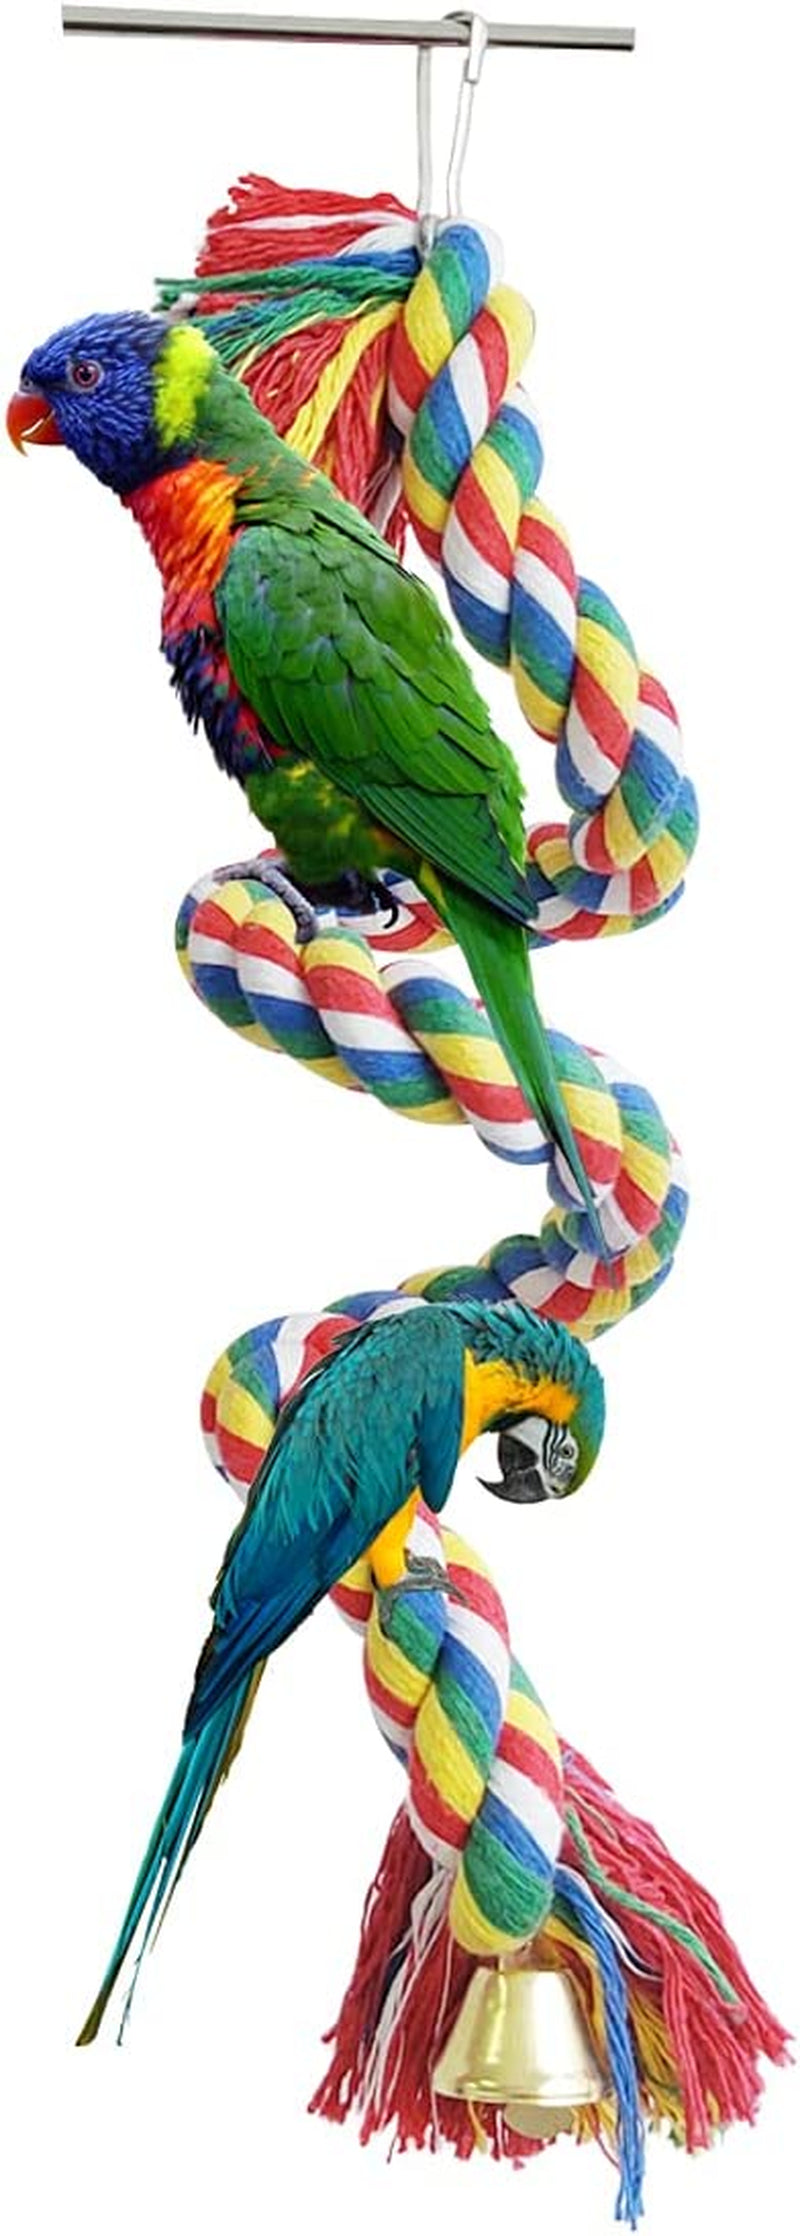 Bird Rope Perch, Colorful Rotate Cotton Rope Bird Perch Stand, Rope Bungee Bird Toy for Parakeets Cockatiels, Conures, Parrots, Love Birds Animals & Pet Supplies > Pet Supplies > Bird Supplies zhuohai   